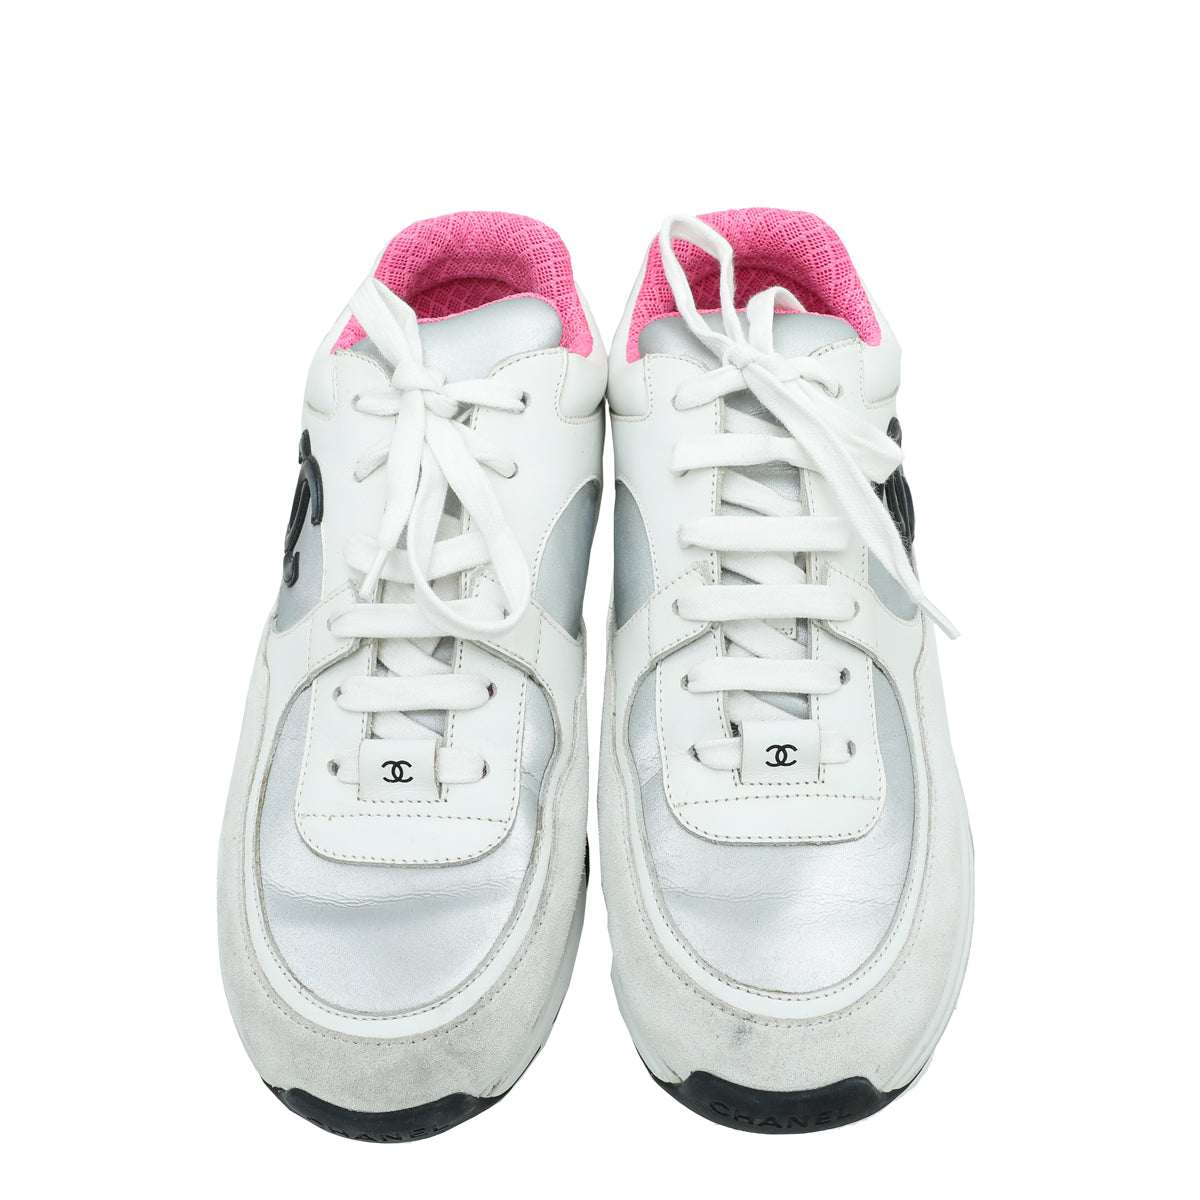 Chanel 2021 Low-Top Sneakers White 38.5 G37488 21S